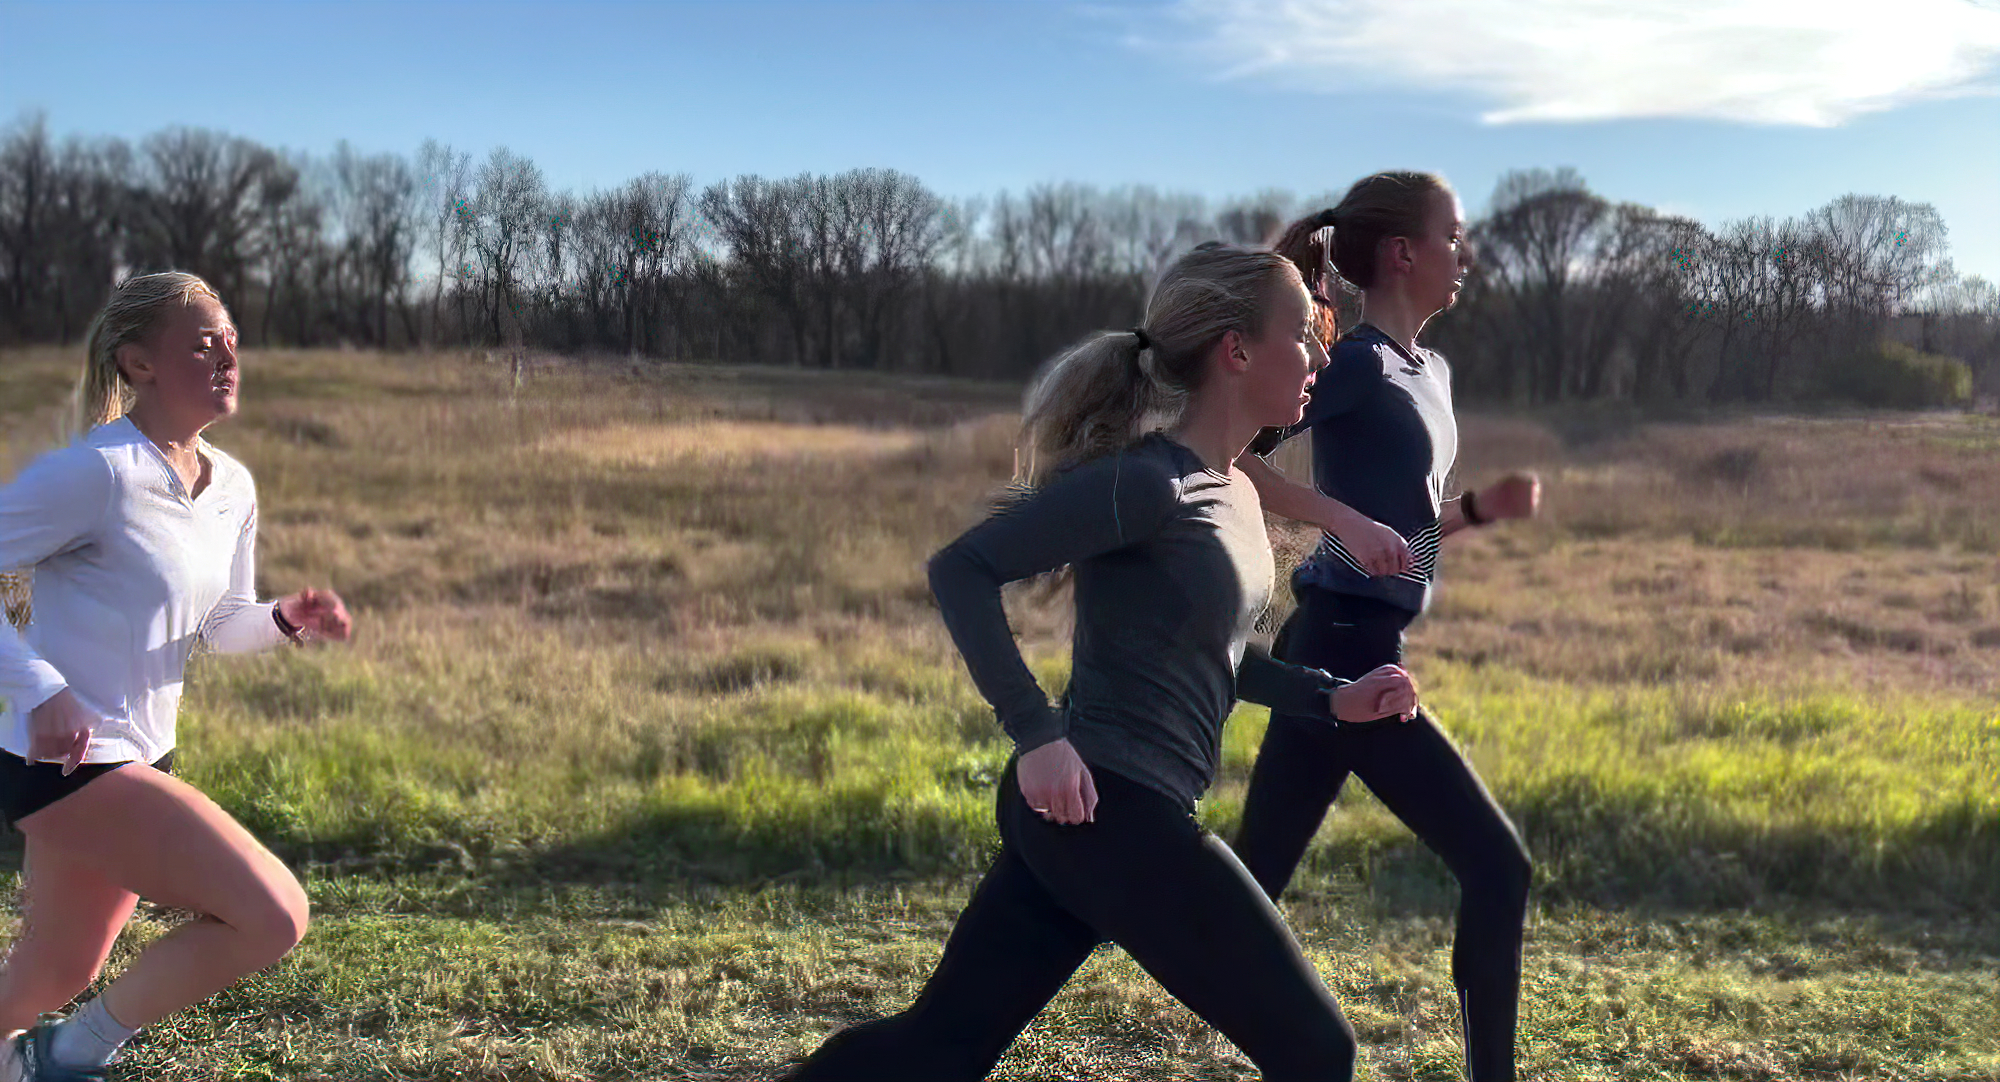 A trio of Cobber runners head out on an early-morning training session.